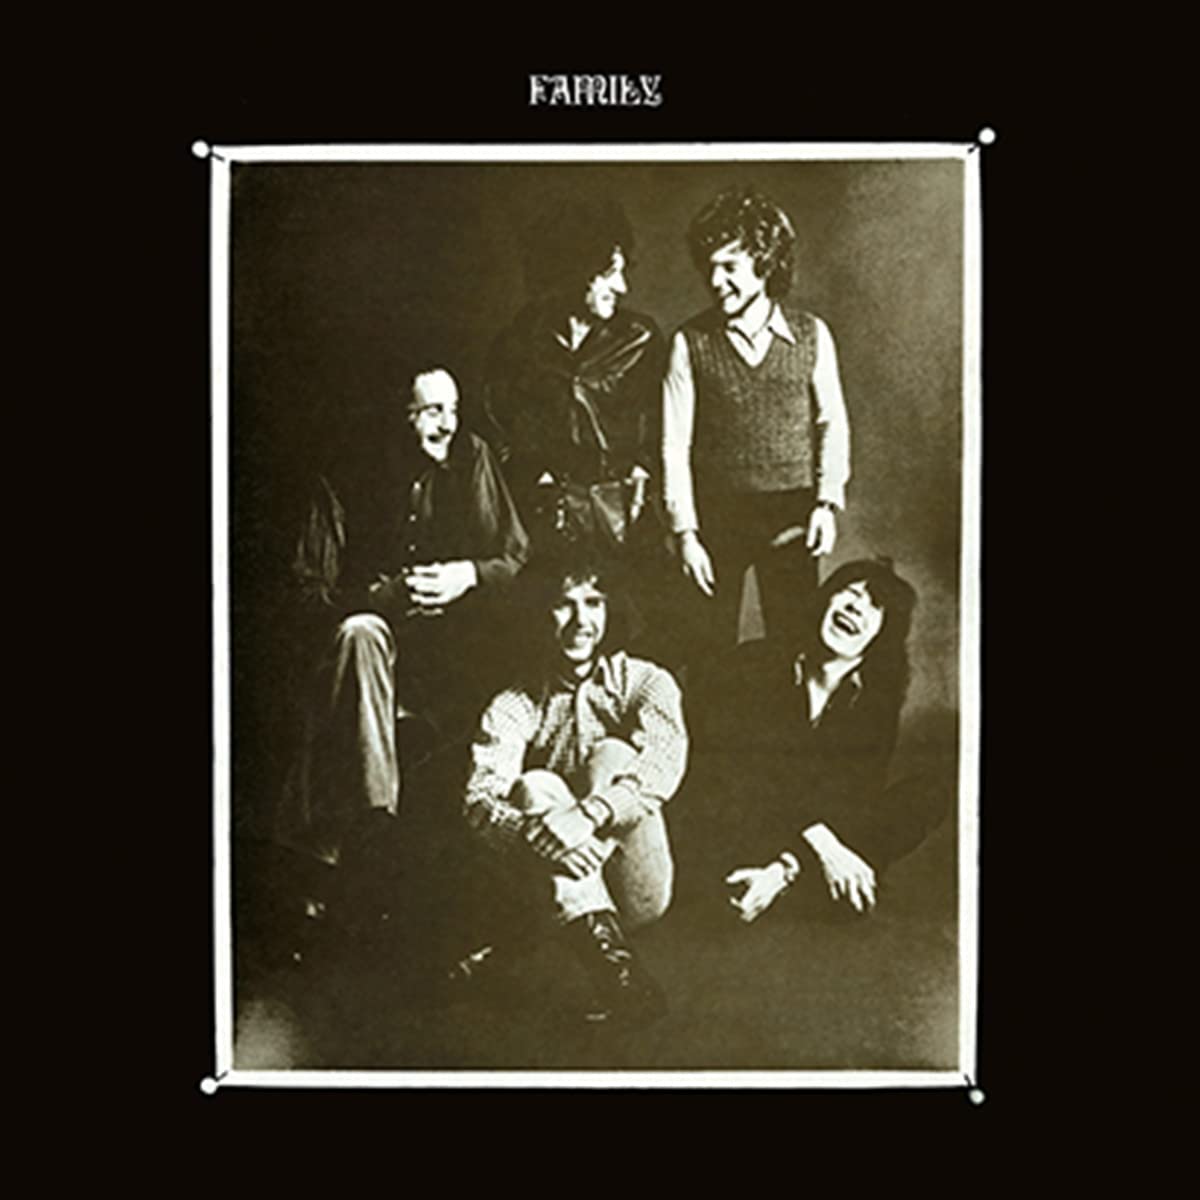 FAMILY - A Song For Me - Deluxe